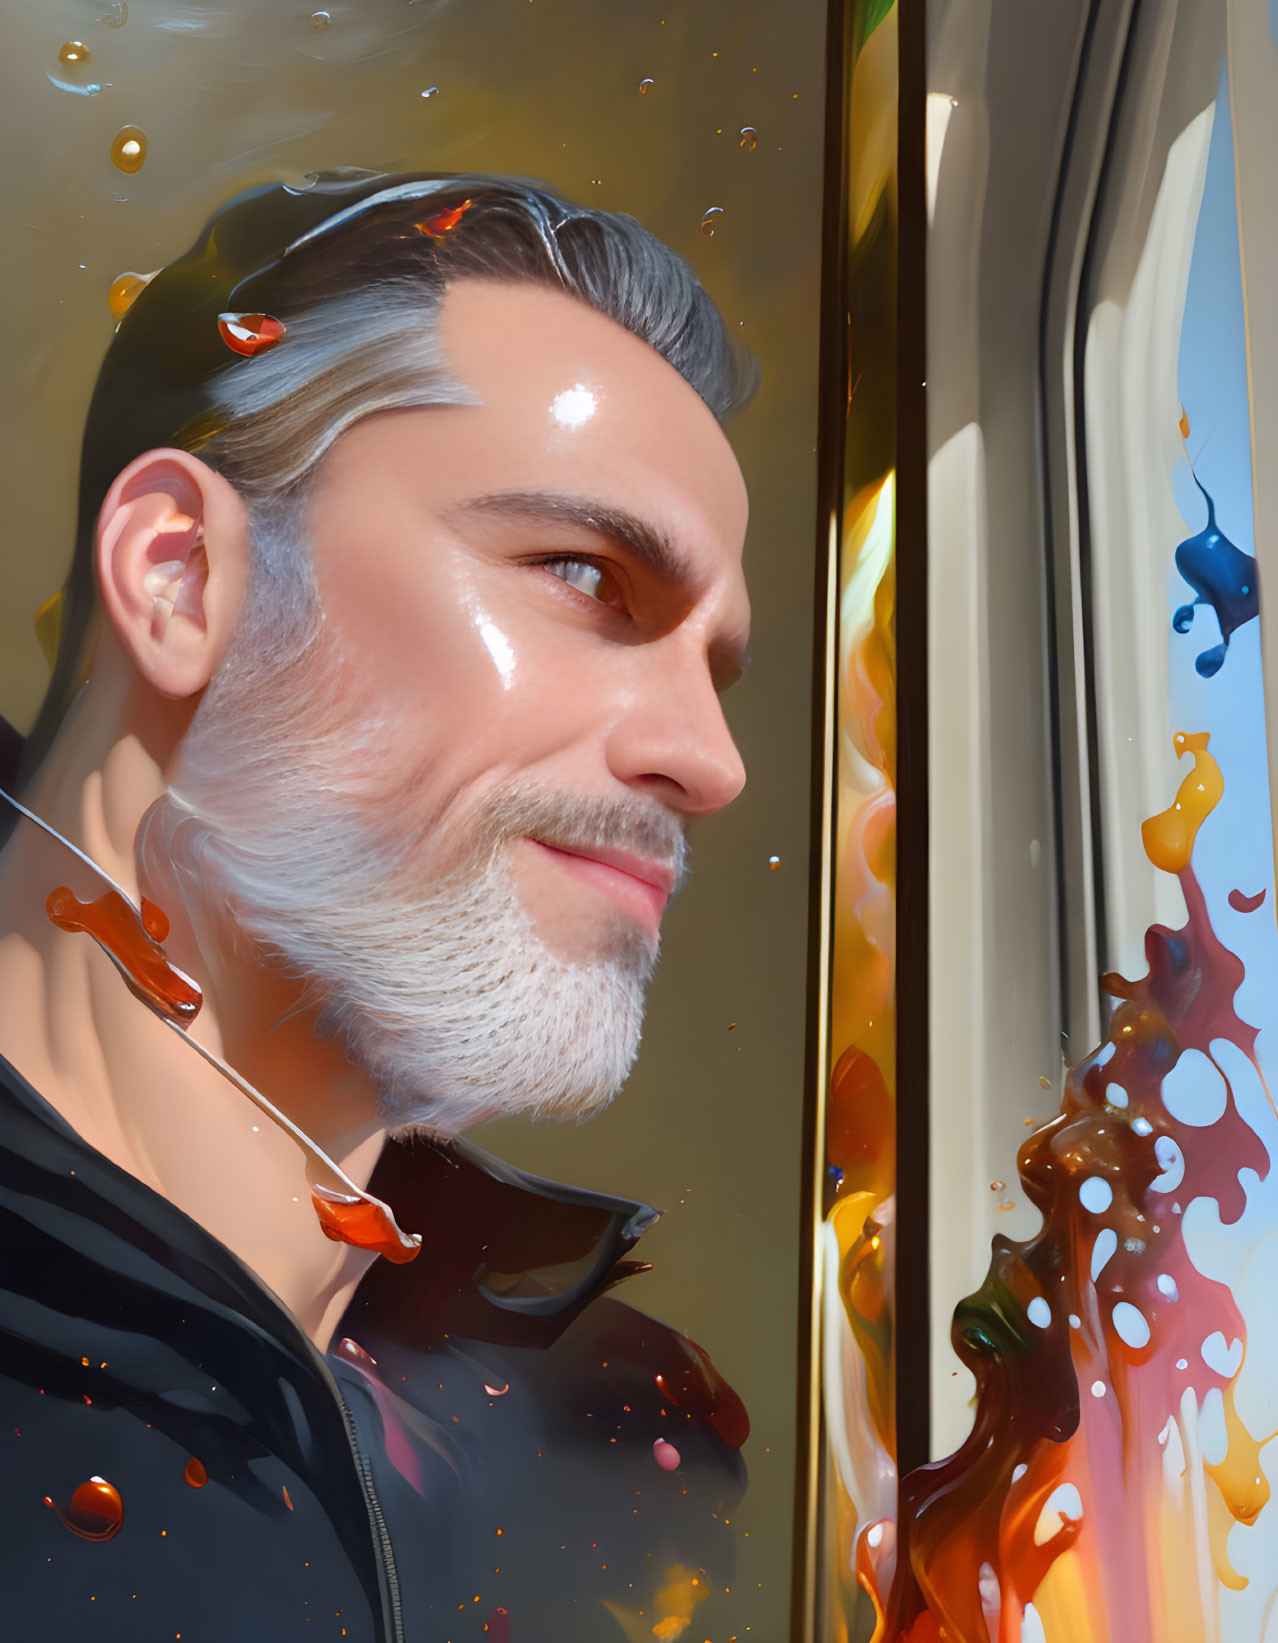 Grey-haired man with beard smiling next to abstract paint splash on window